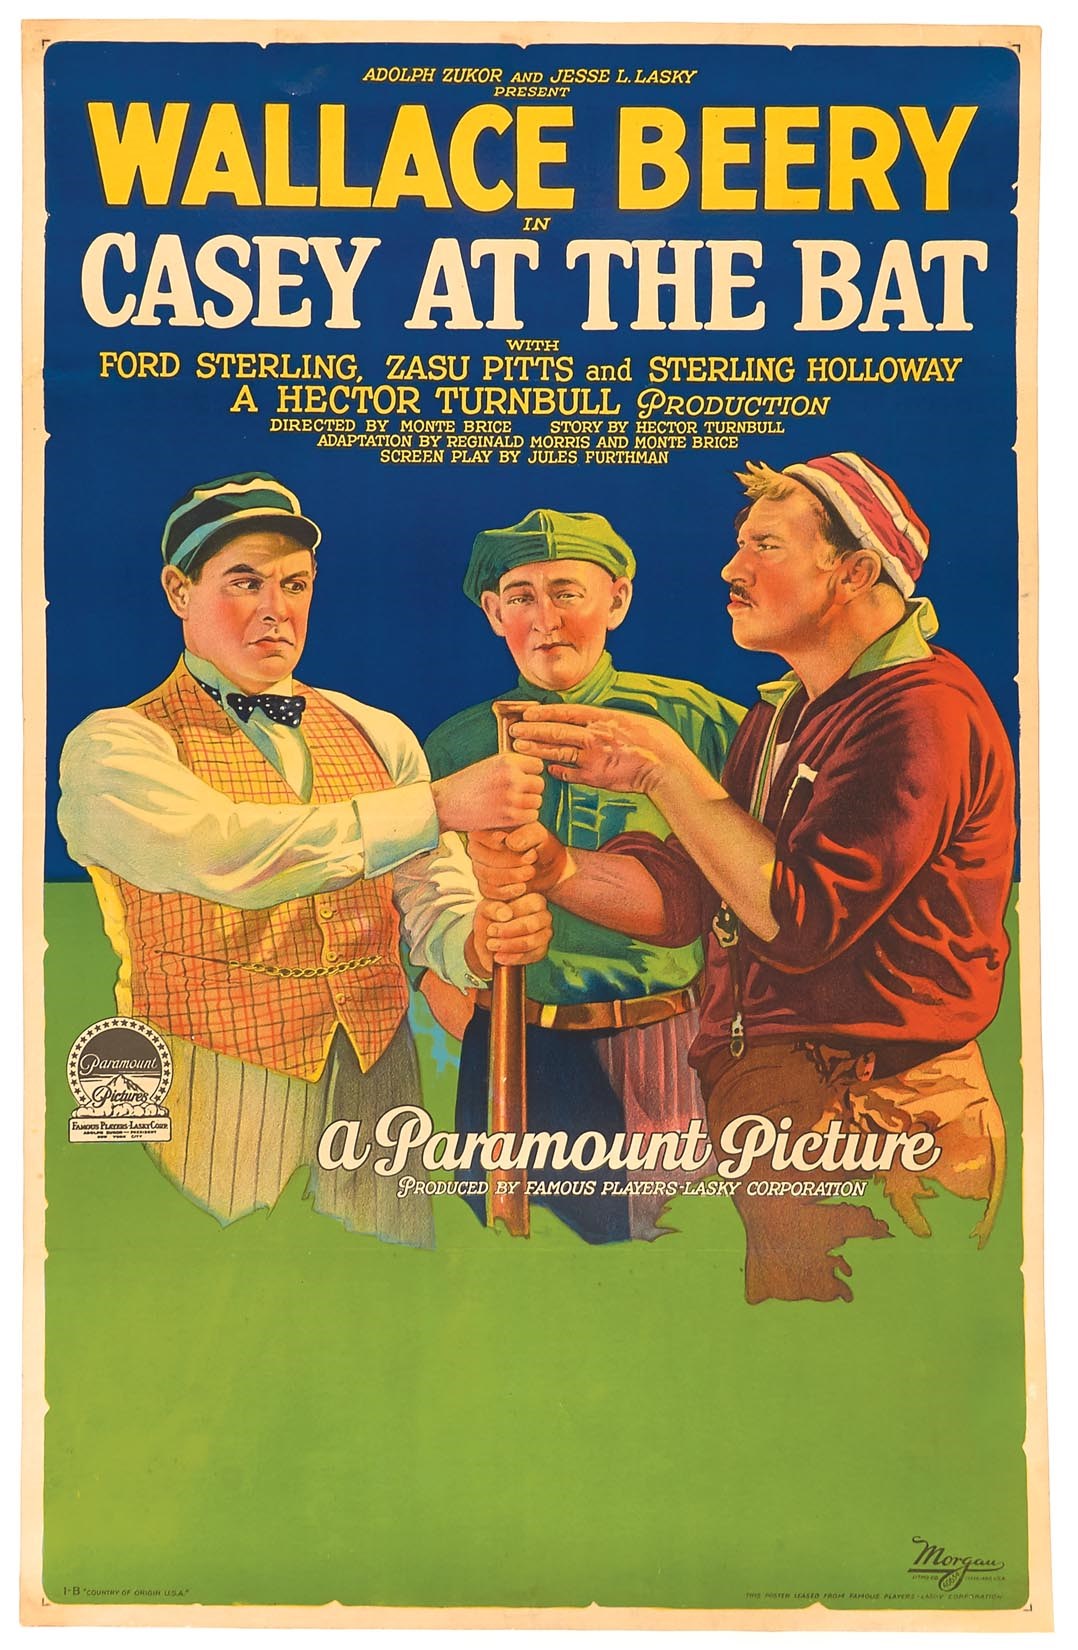 Best of the Best - 1927 Casey at the Bat Film Poster - First One Offered Publicly